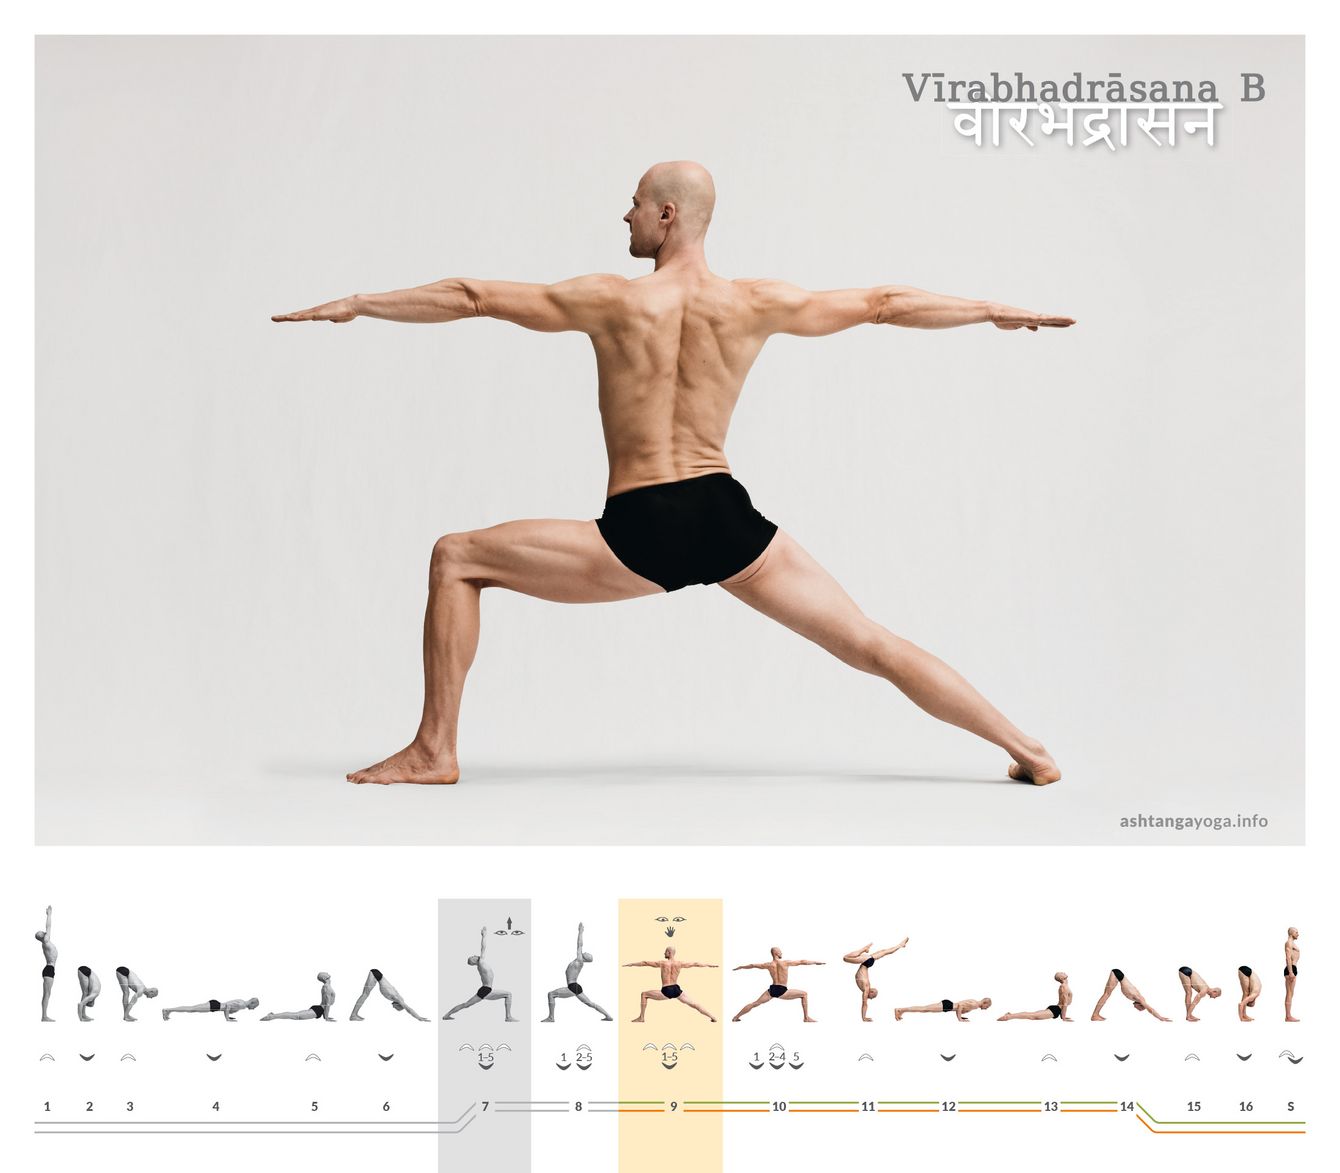 With the transition from  Virabhadrasana A to B the practitioner widens their step, lowers the arms stretching them horizontally to either side. This pose is also known as – "the powerful warrior pose“